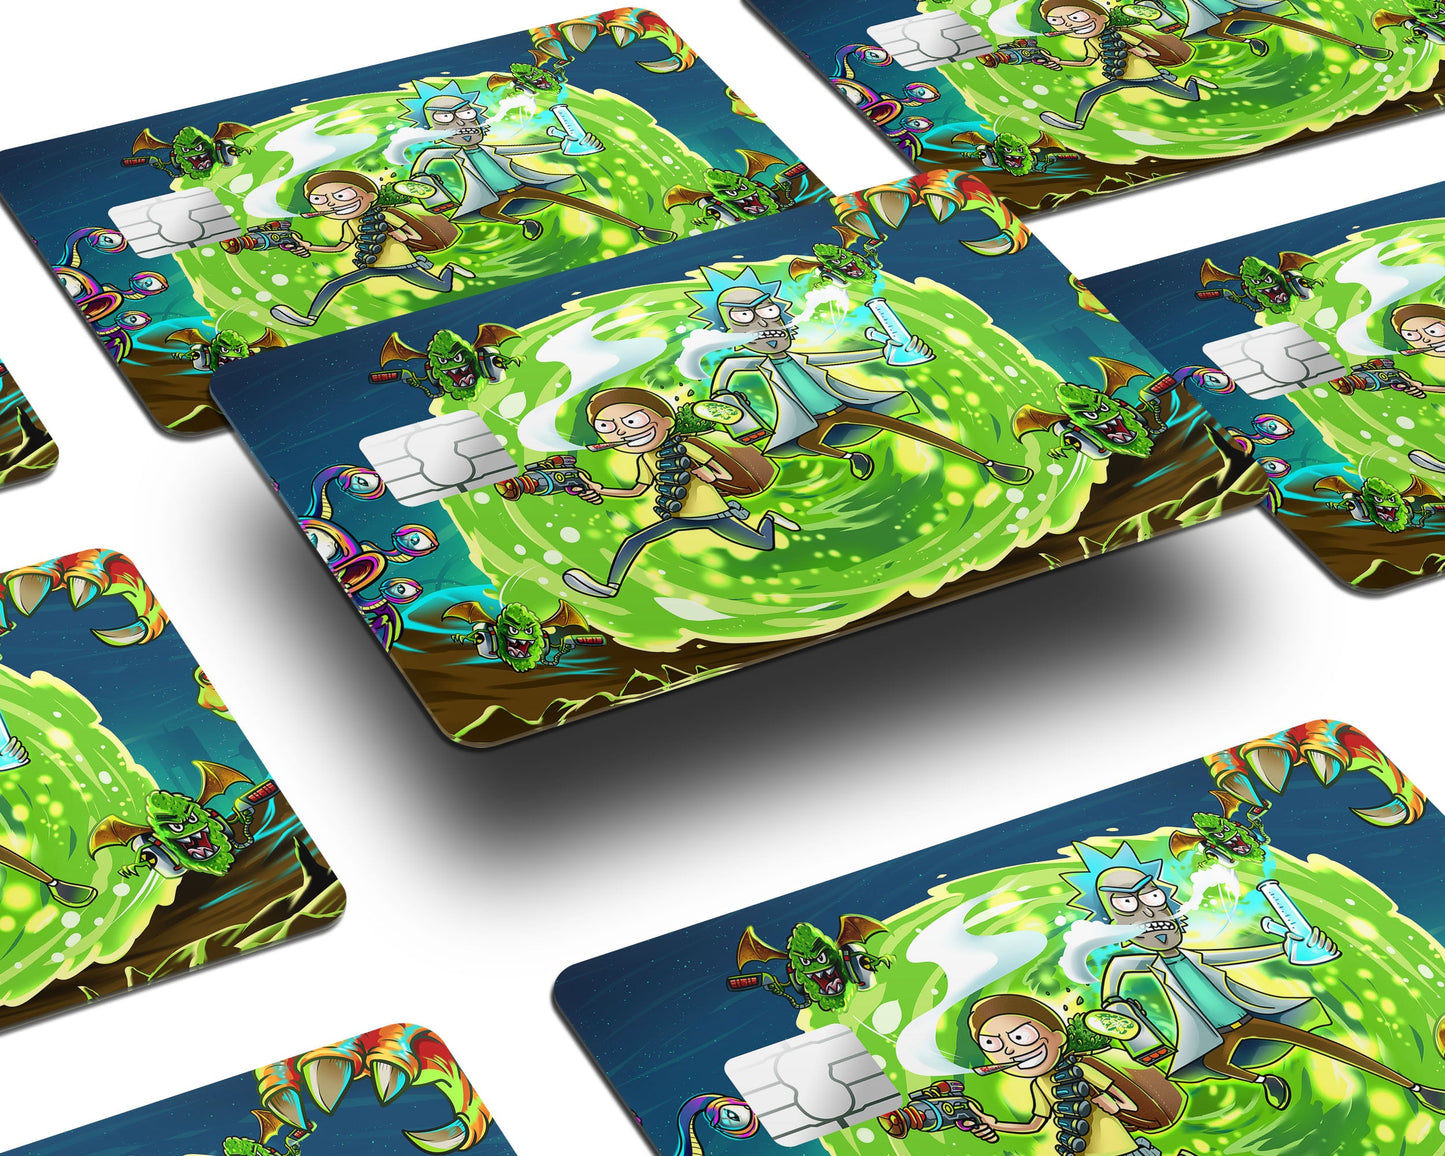 Anime Town Creations Credit Card Rick and Morty Portal Time Window Skins - Anime Rick and Morty Credit Card Skin